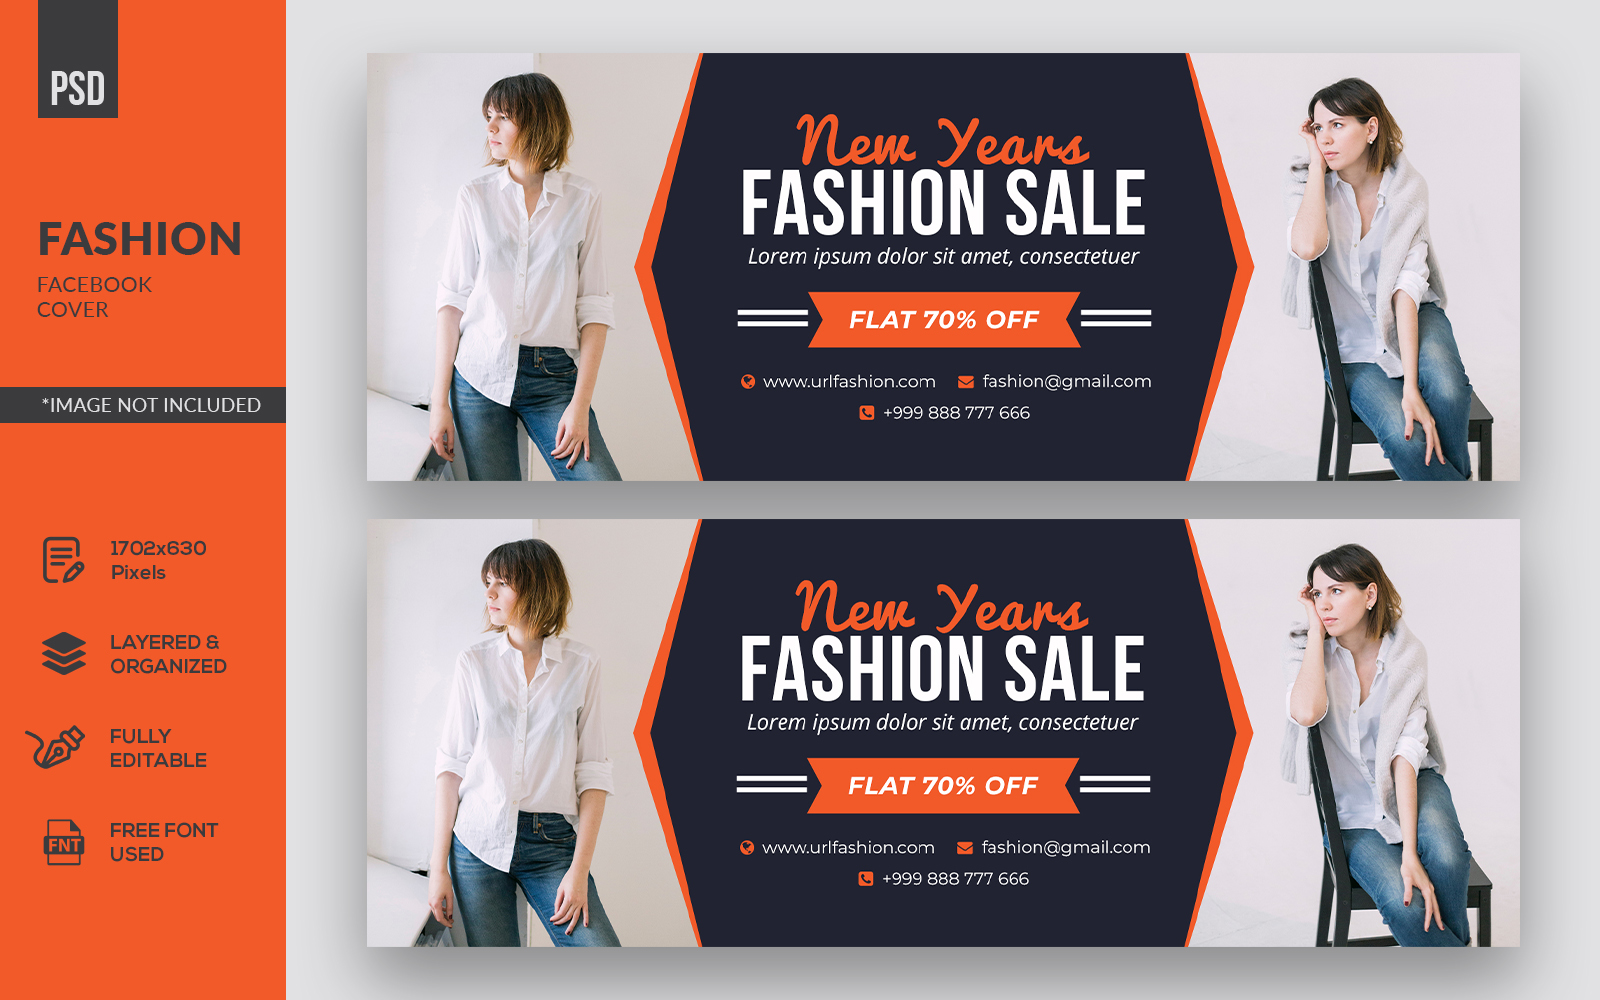 Clean New Year Design Fashion Facebook Cover Social Media Template